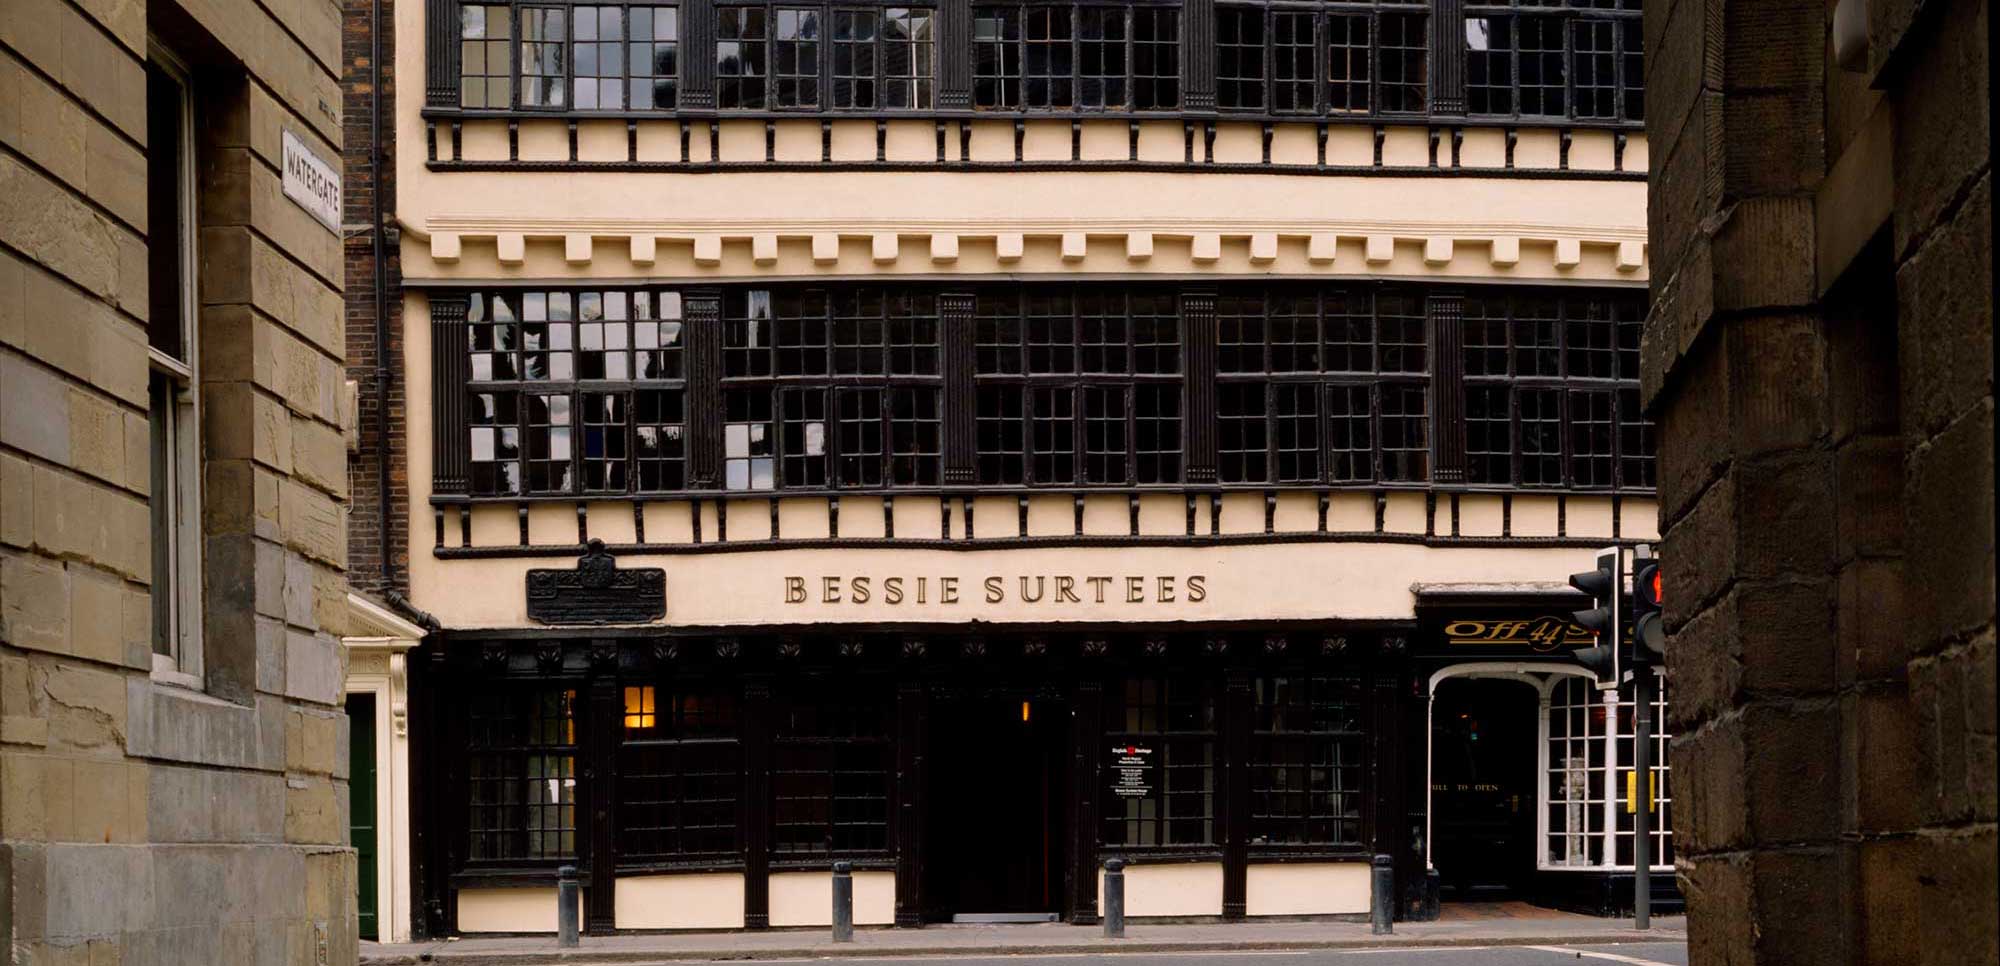 Exterior view of Bessie Surtees House from Watergate lane